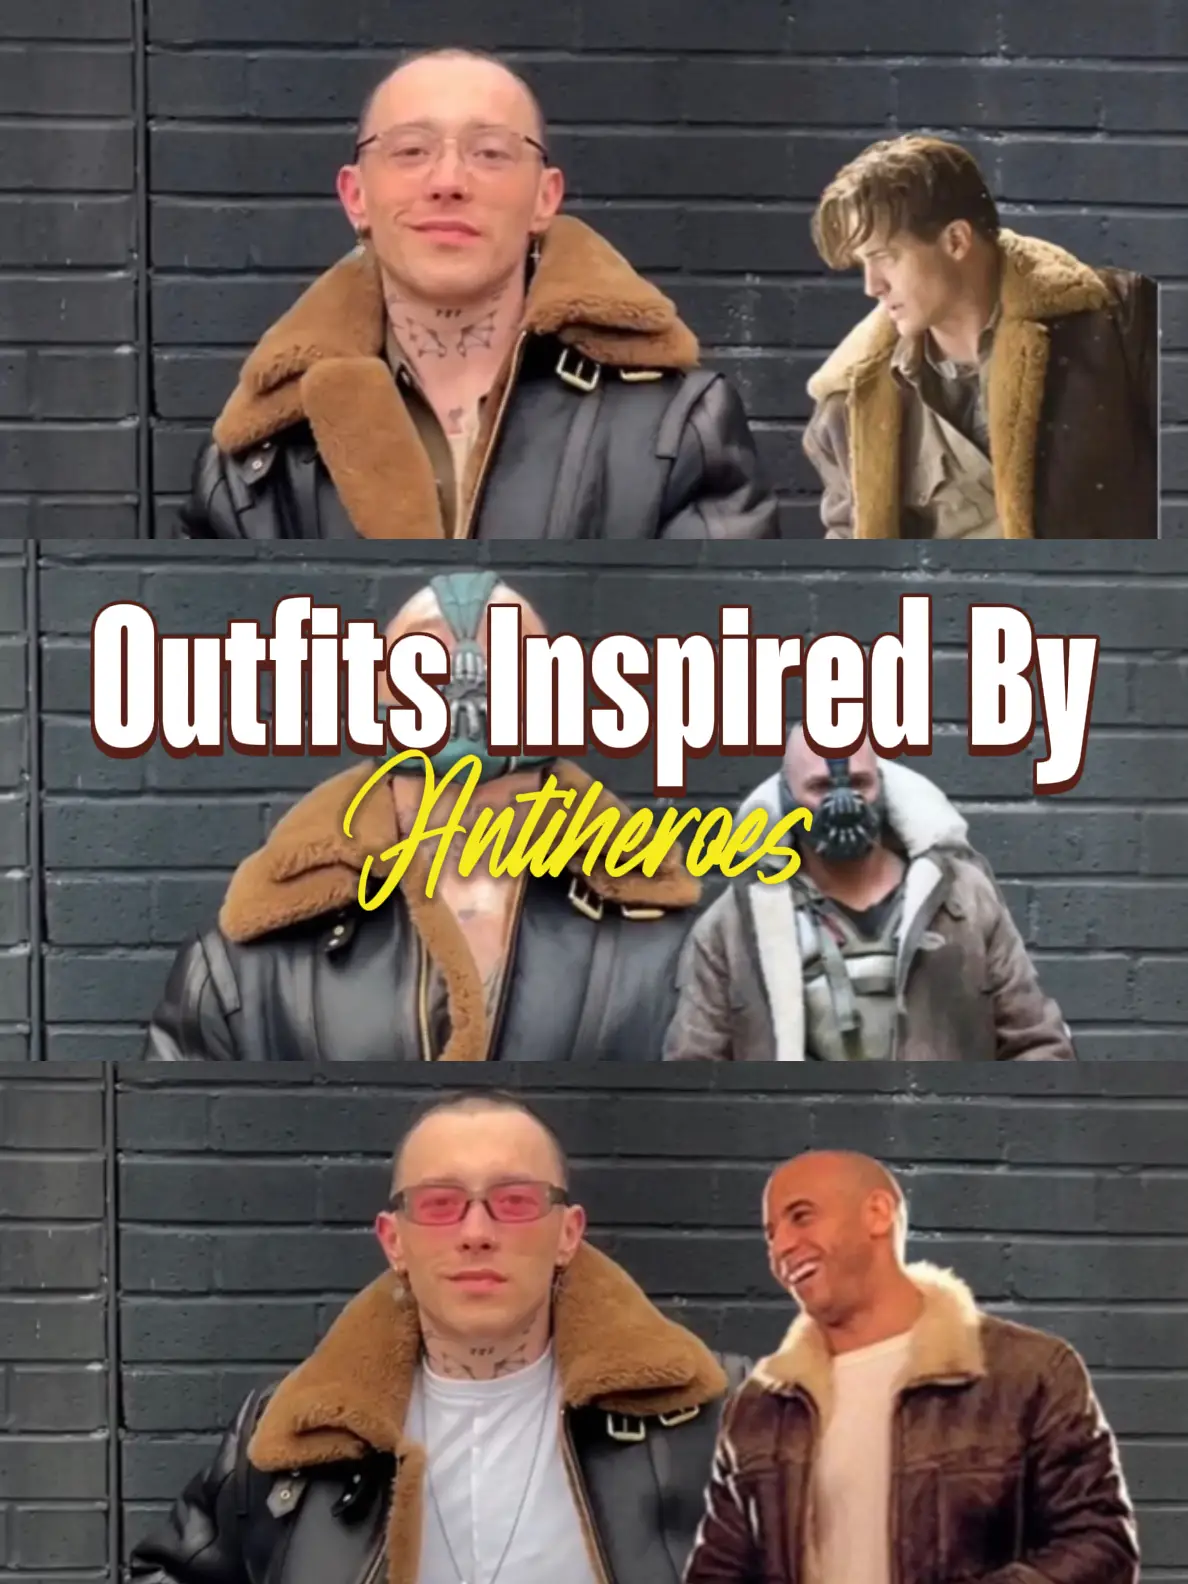 Outfits inspired by THE JACKET | Mike Dont | Lemon8 SAME posted Be Gallery by